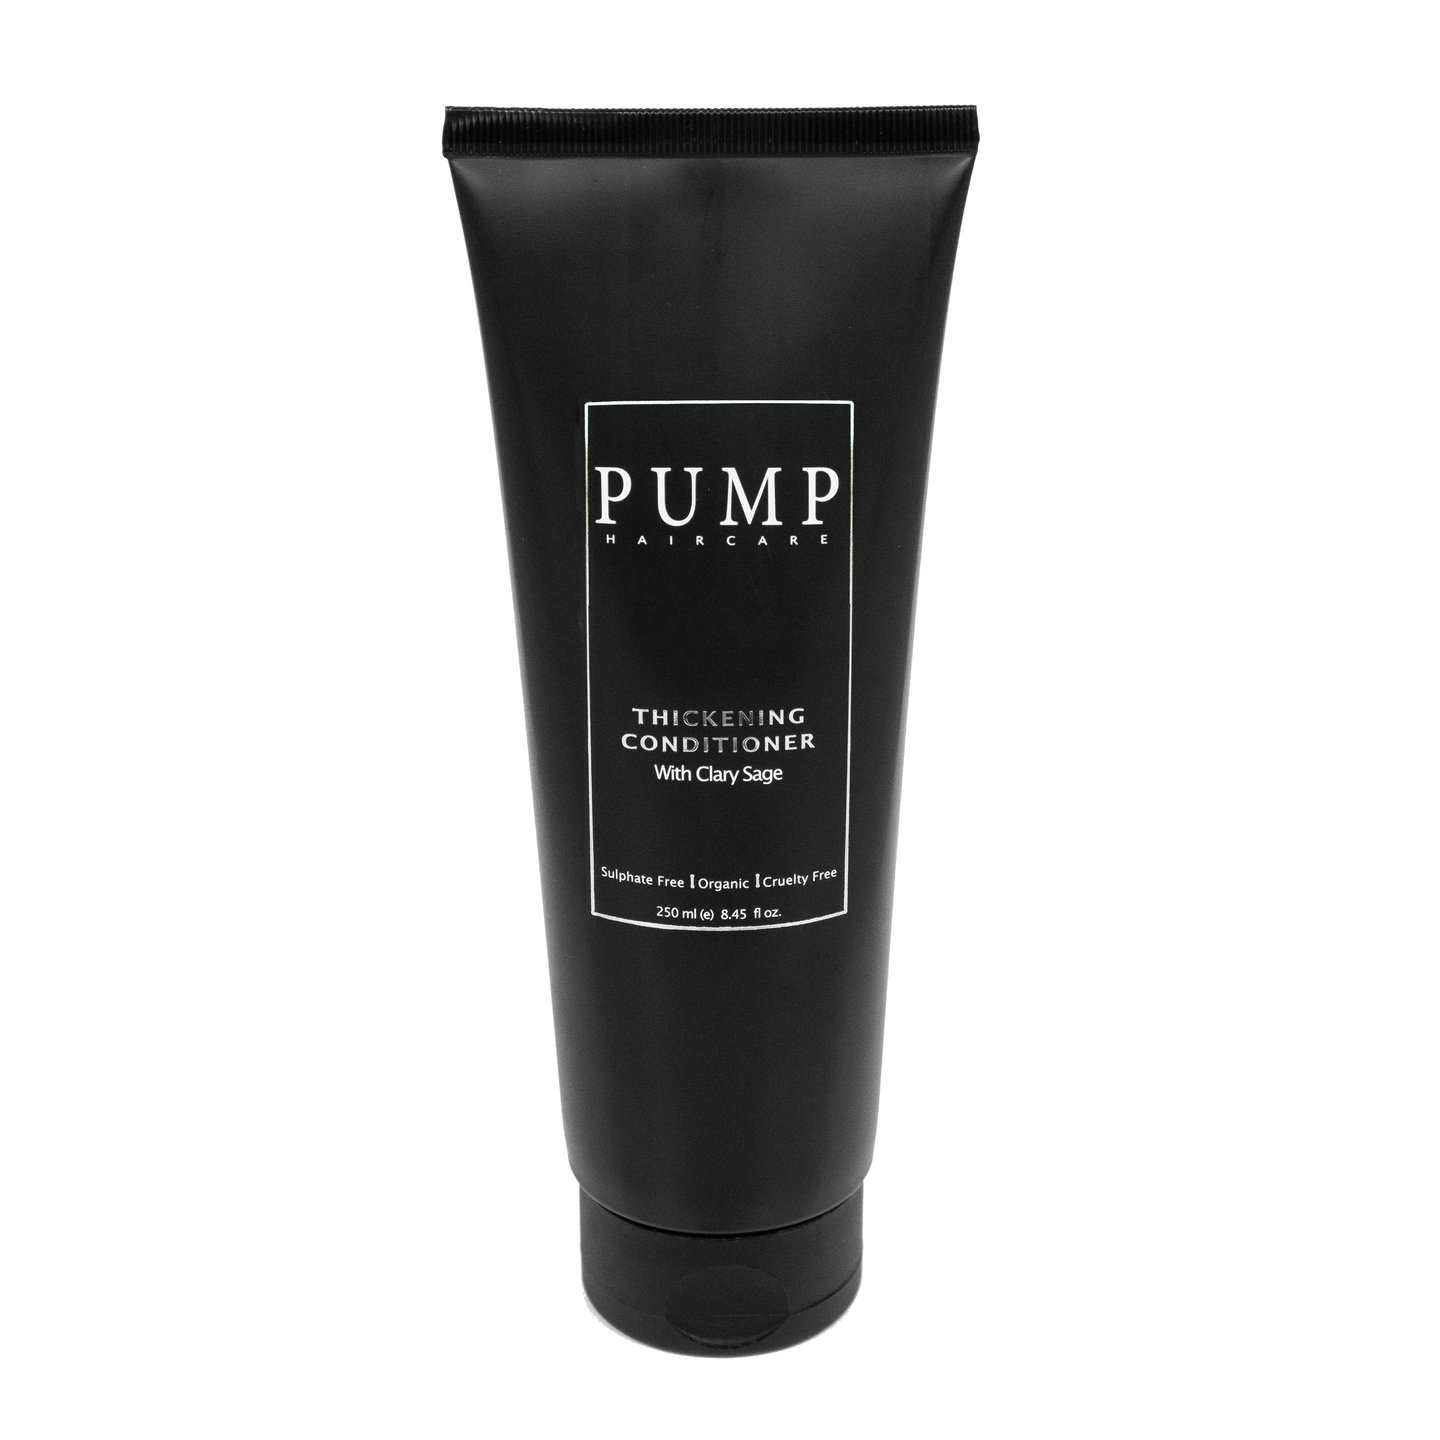 Pump Haircare Thickening Conditioner